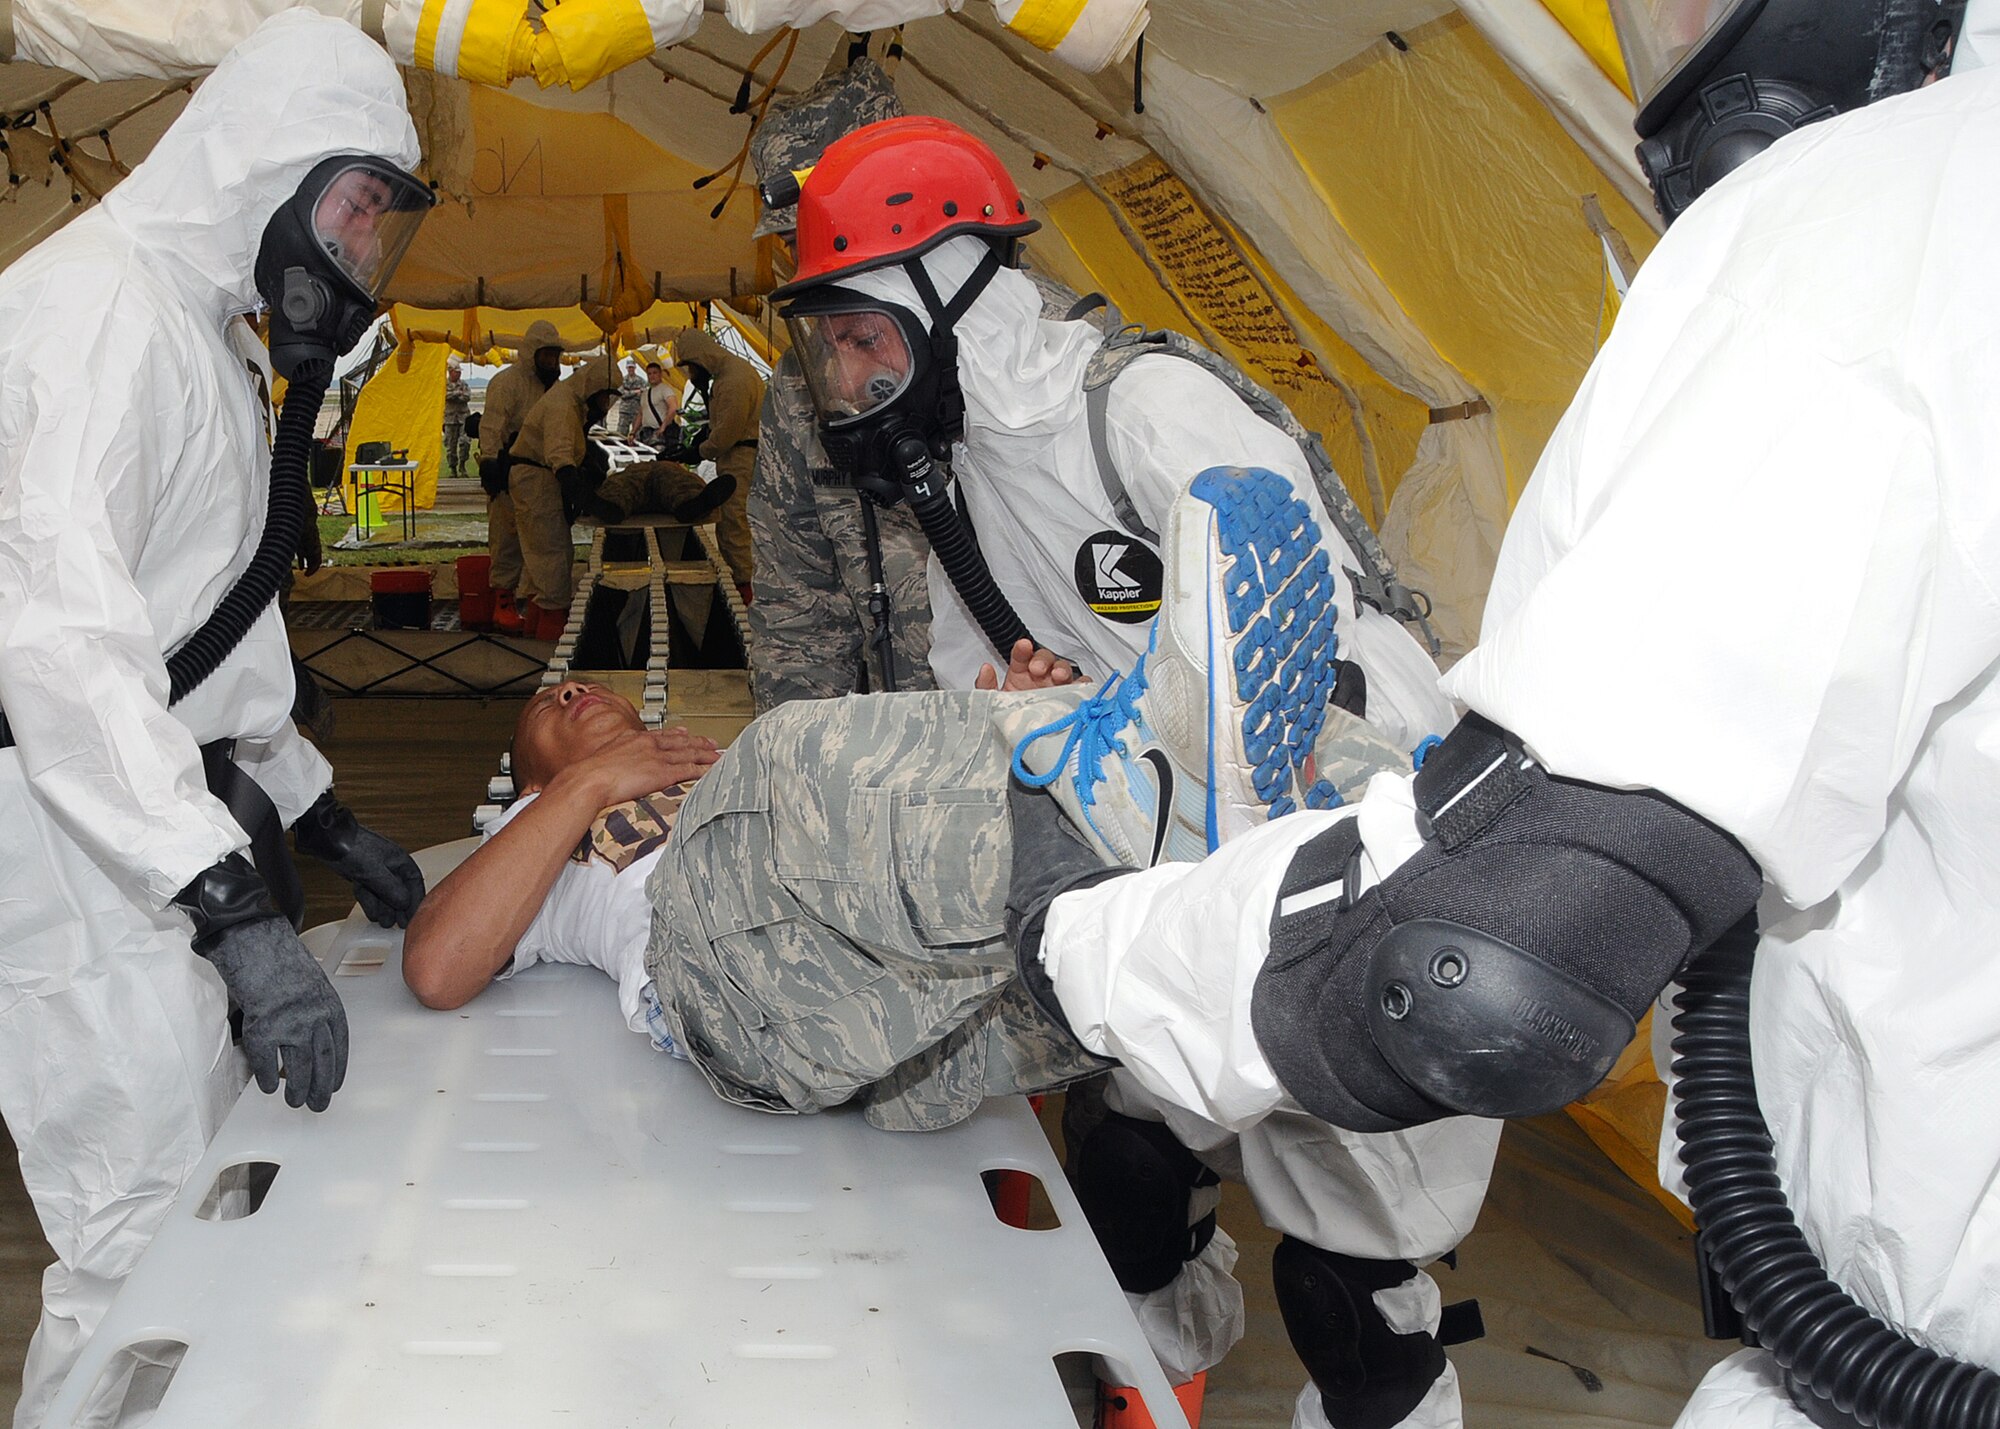 Members of the 143d Airlift Wing involved in the Region 1 Chemical, Biological, Radiological, Nuclear, High Yield Explosive Enhanced Response Force Package (CERFP) perform a training exercise to demonstrate the team's responsibilities and capabilities to potential new members and leadership. A member of the RIANG Student Flight (on stretcher) volunteered to play a victim for the exercise. The Region 1 CERFP is made up of members of the Air and Army National Guard from Maine, New Hampshire, and Rhode Island. National Guard Photo by Master Sgt Janeen Miller (RELEASED)